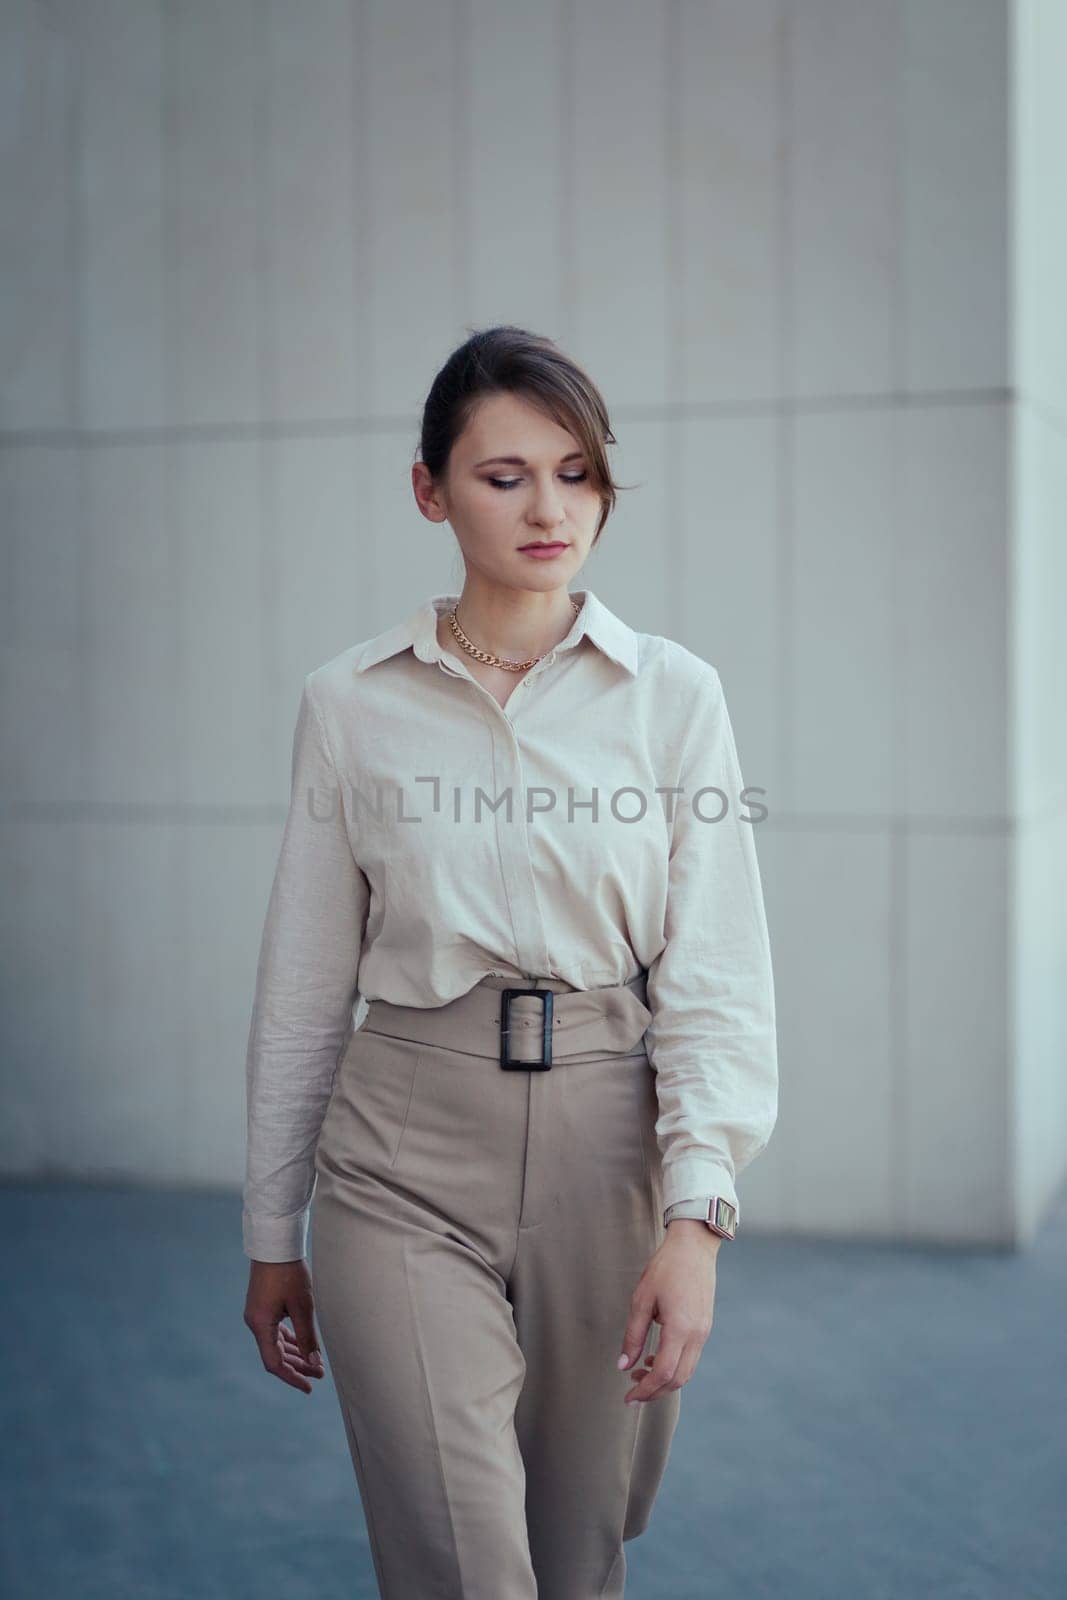 Young caucasian business woman in office fashion style suit in beige tones walking towards the camera.